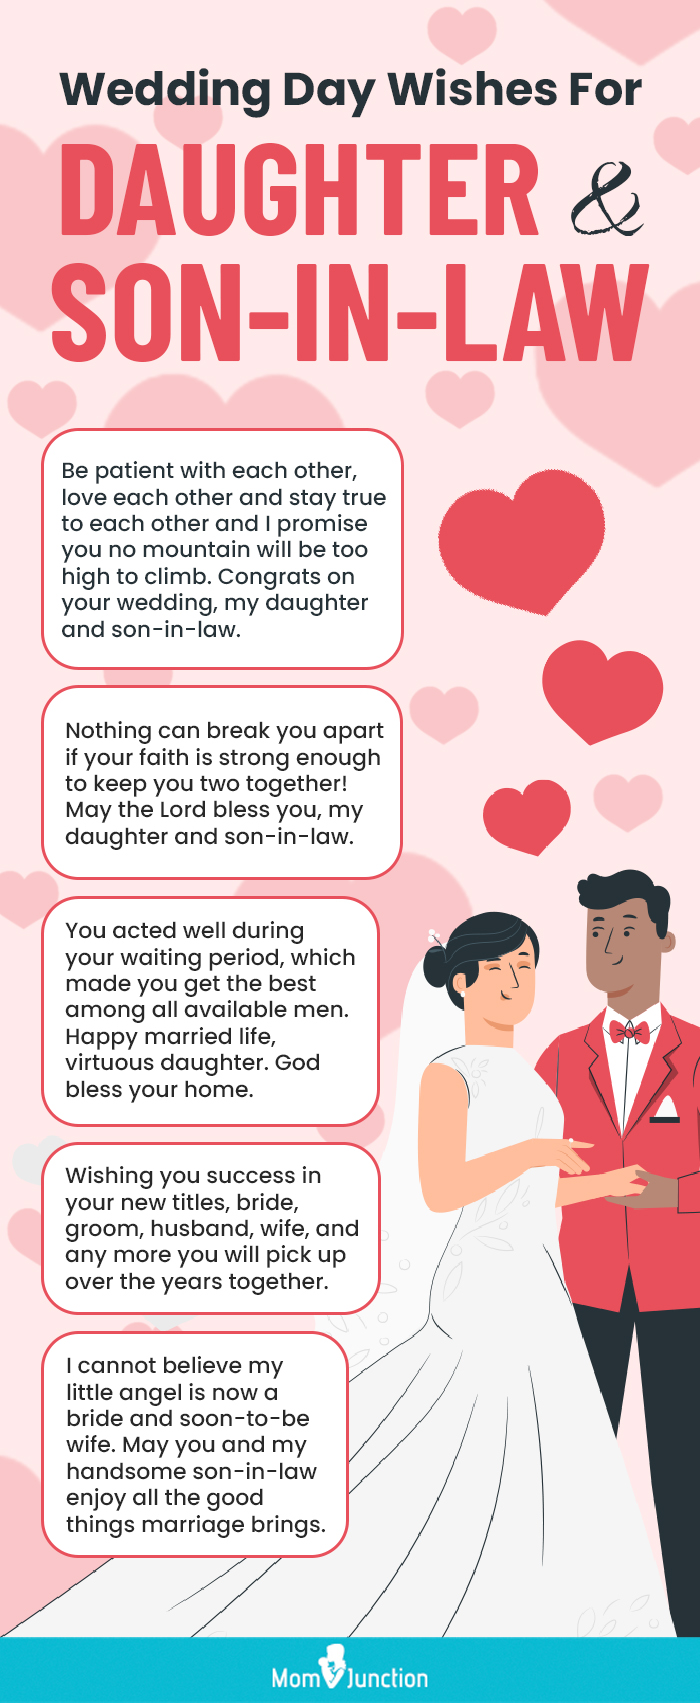 wedding day wishes for gaughter and son in law (infographic)